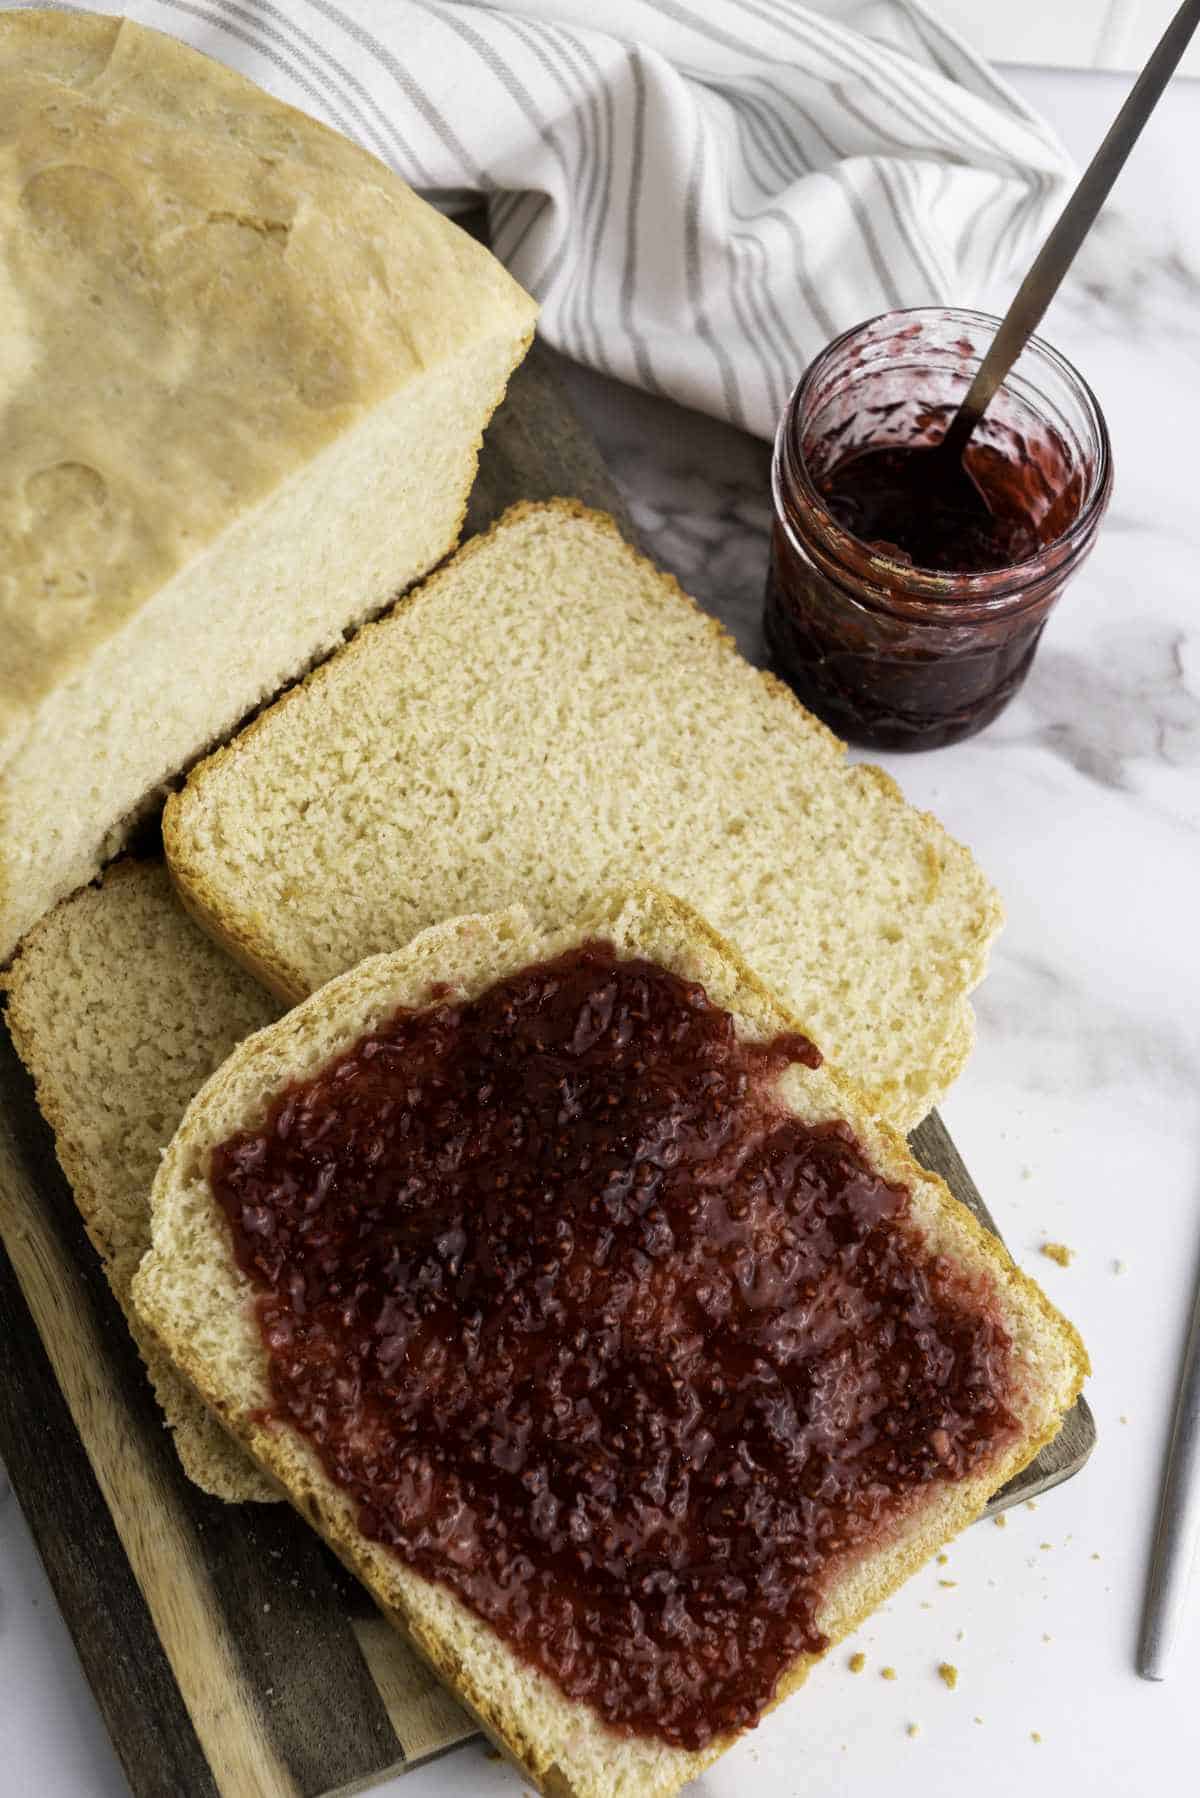 Slices of bread with jam spread on it.